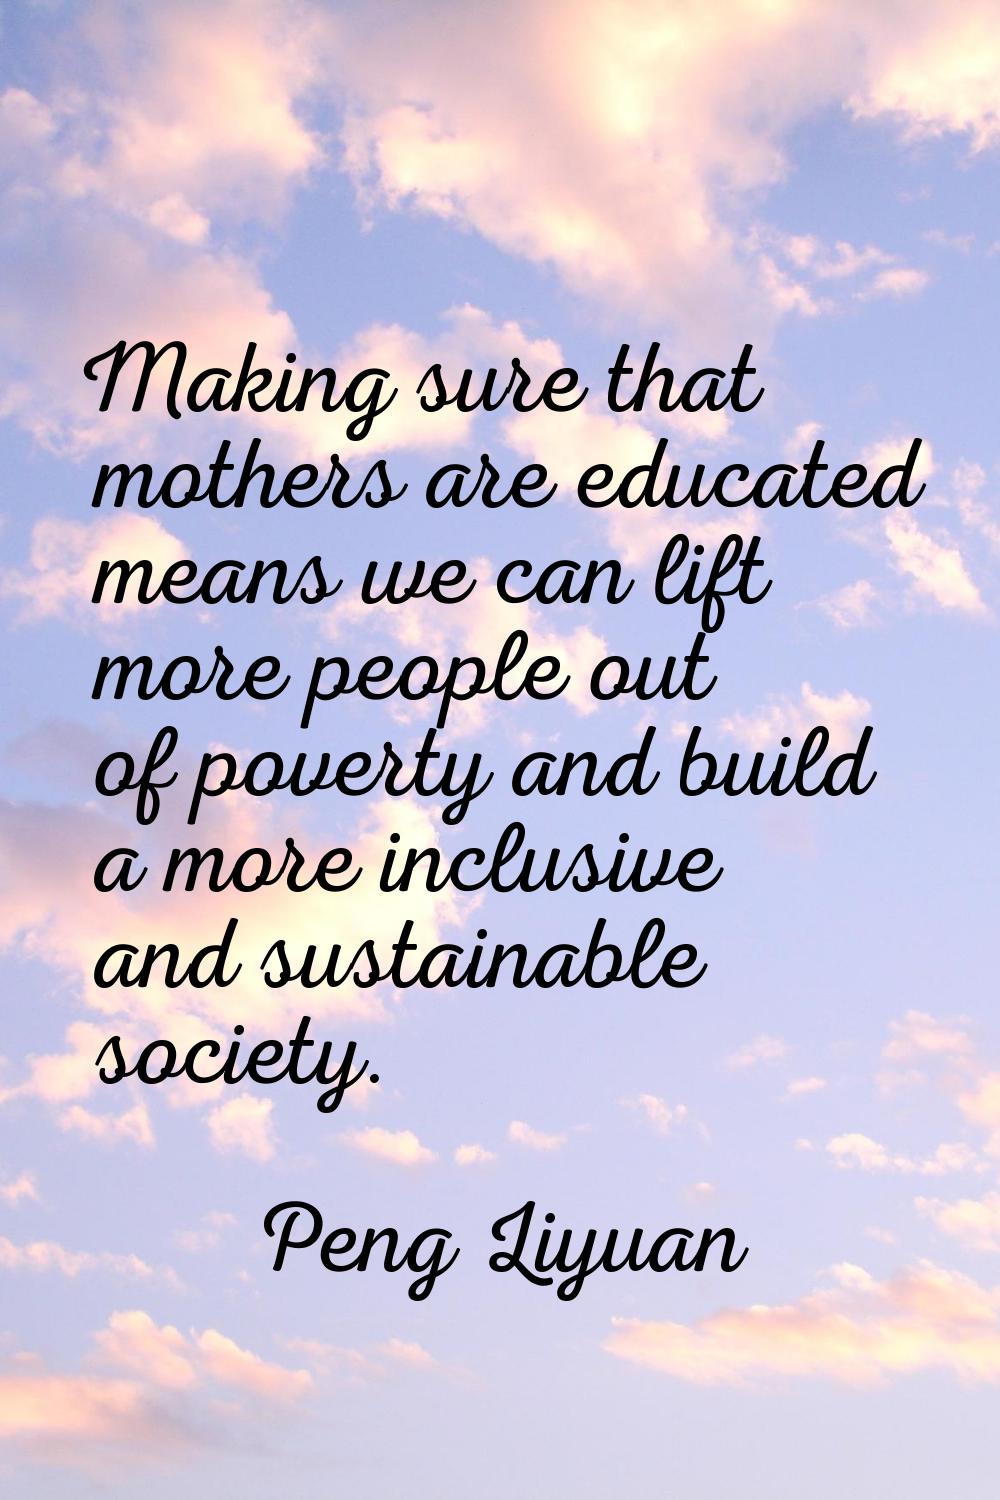 Making sure that mothers are educated means we can lift more people out of poverty and build a more